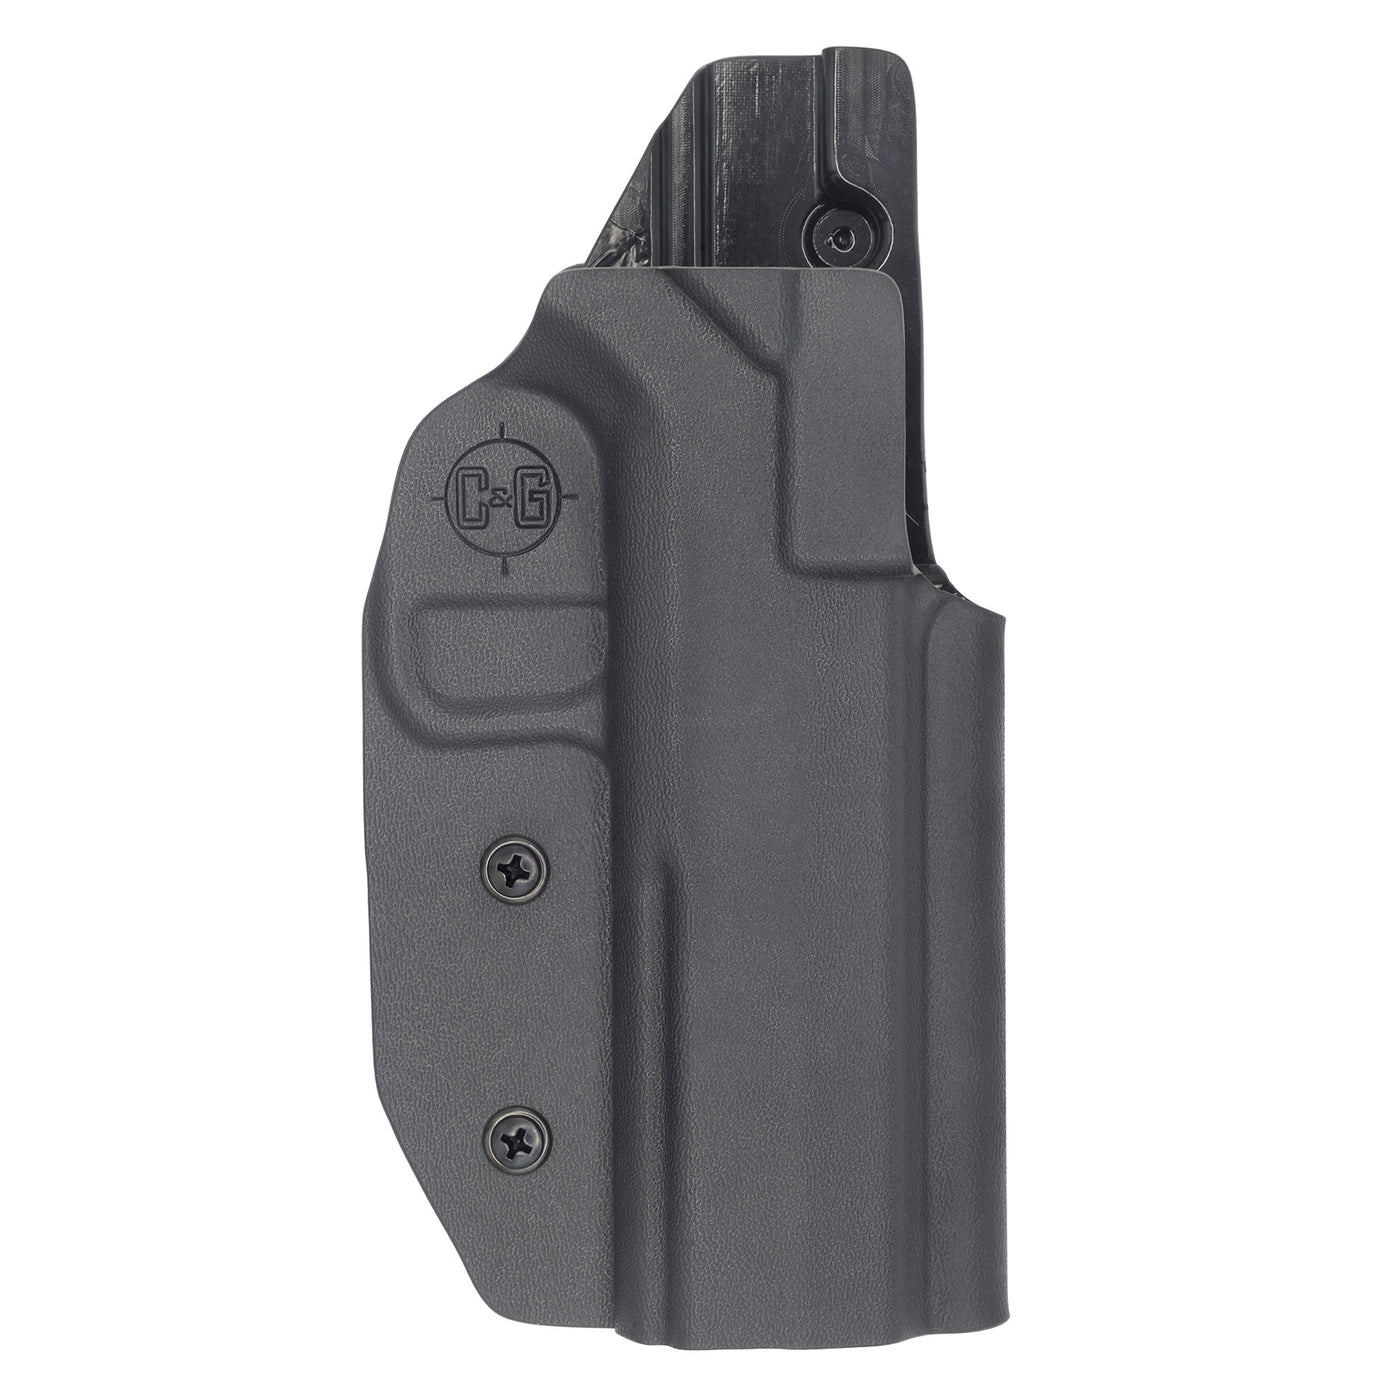 This is a custom C&G Holsters Competition Holster that is IDPA, USPSA & 3-GUN legal for the CZ Shadow 2.